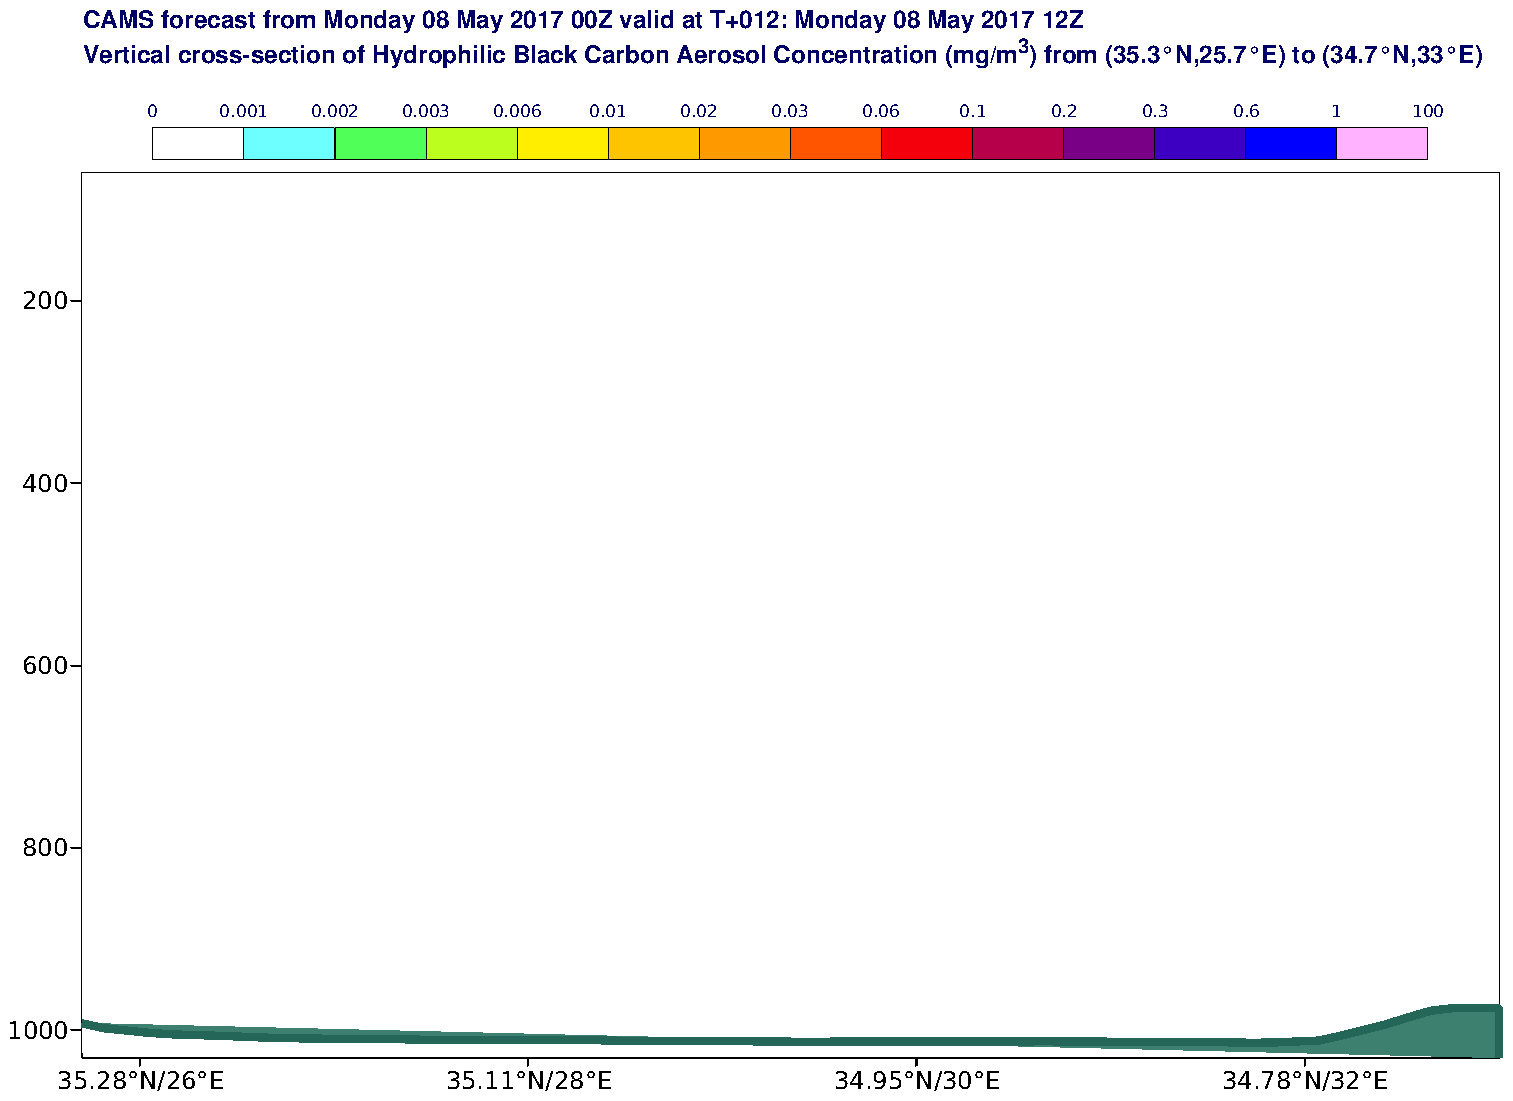 Vertical cross-section of Hydrophilic Black Carbon Aerosol Concentration (mg/m3) valid at T12 - 2017-05-08 12:00